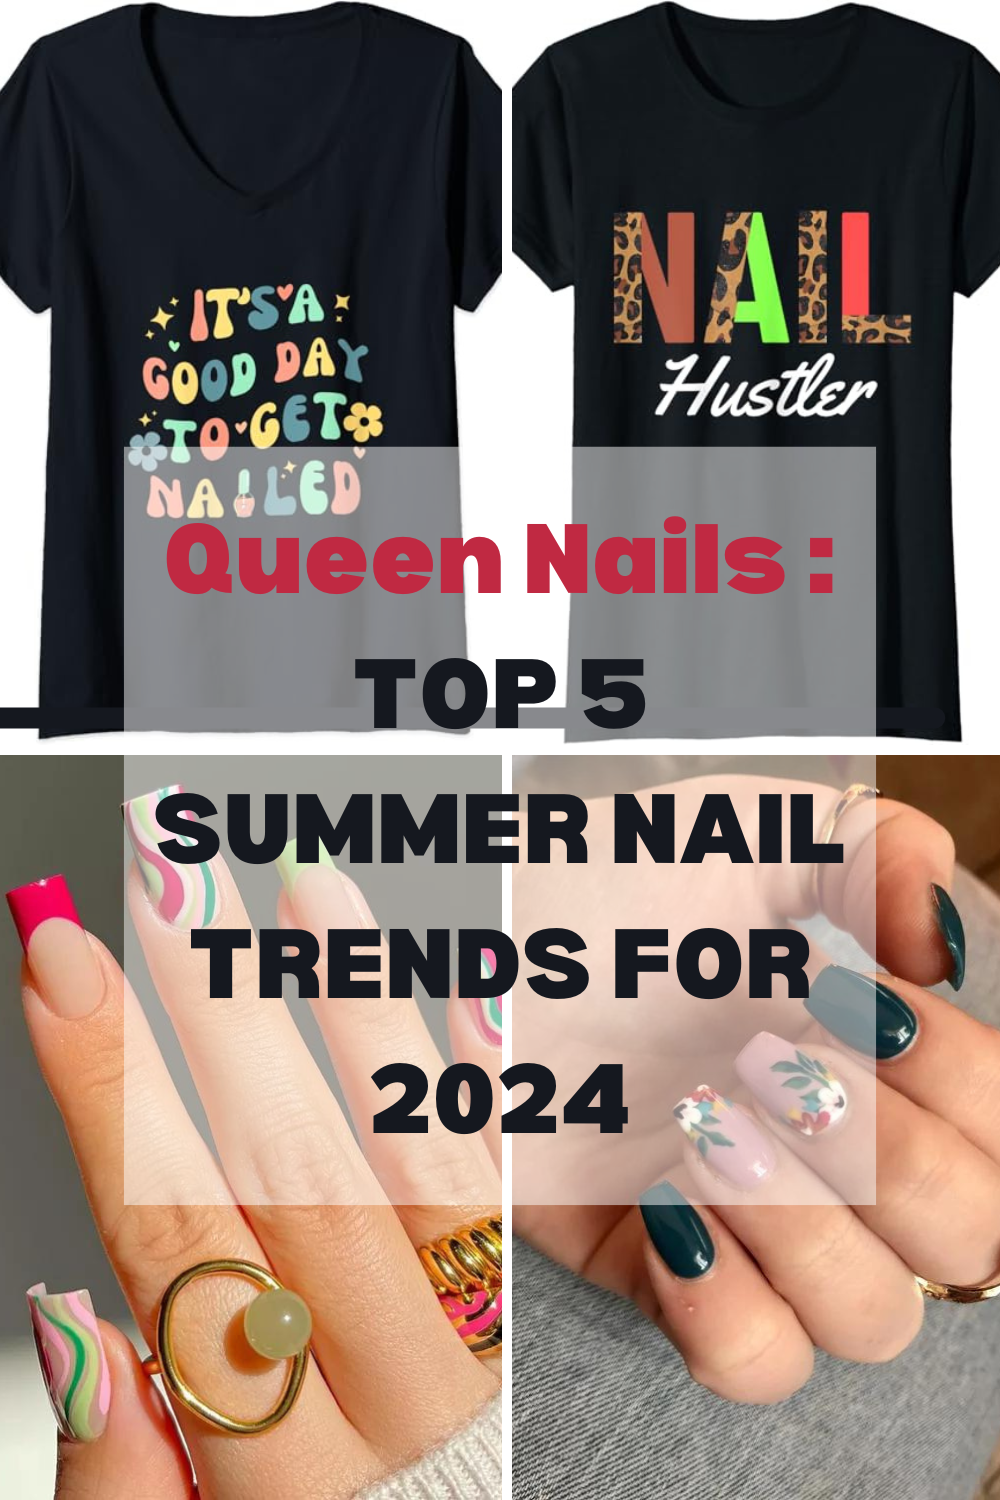 QUEEN NAILS: TOP 5 SUMMER NAIL TRENDS FOR 2024